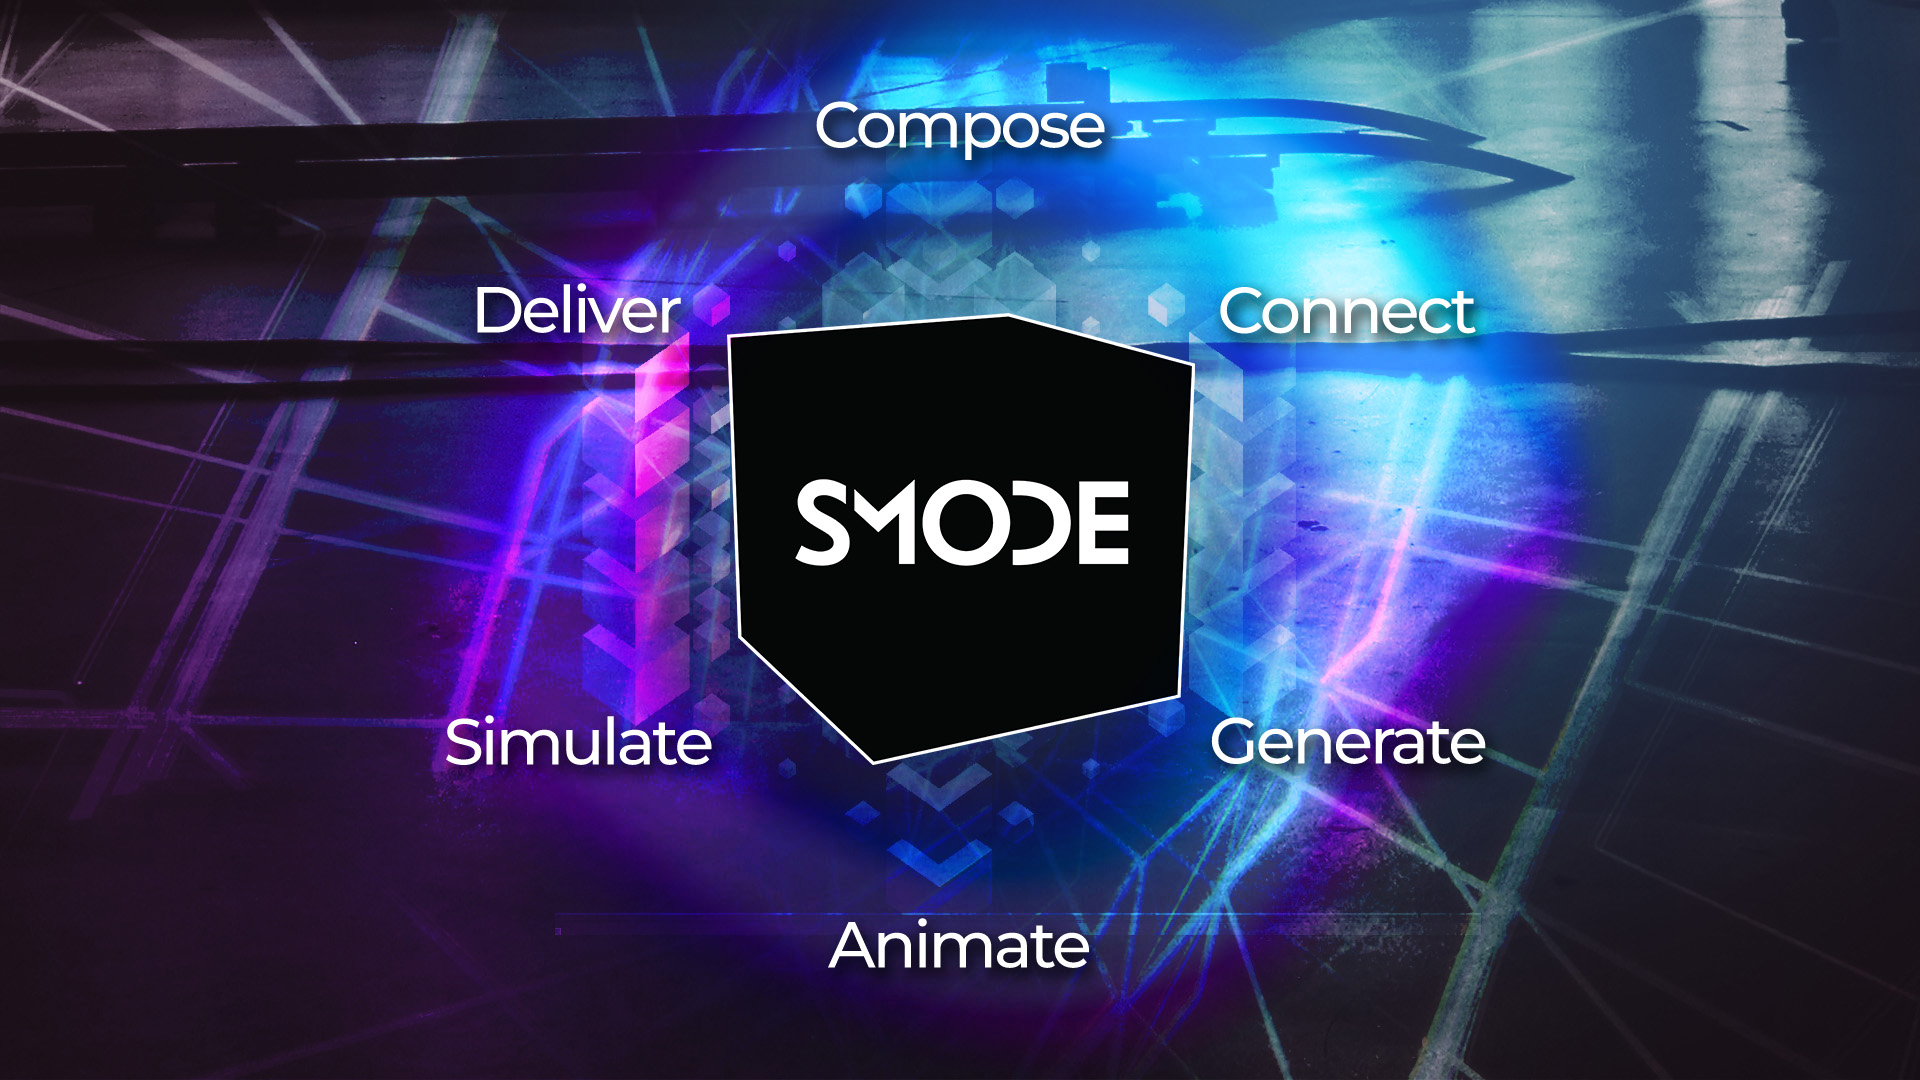 What is SMODE?